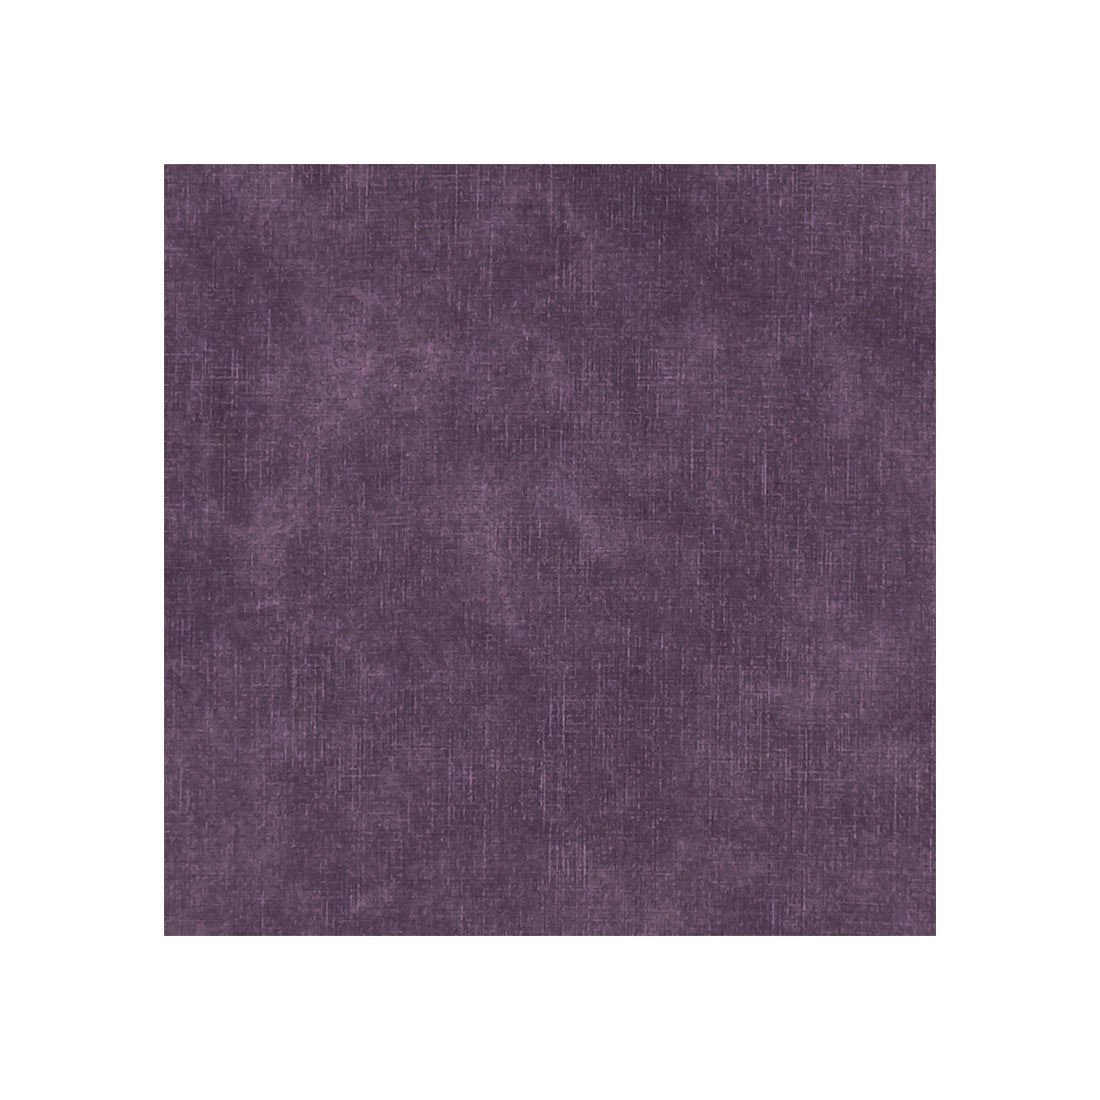 Martello fabric in grape color - pattern F1275/21.CAC.0 - by Clarke And Clarke in the Clarke &amp; Clarke Martello collection